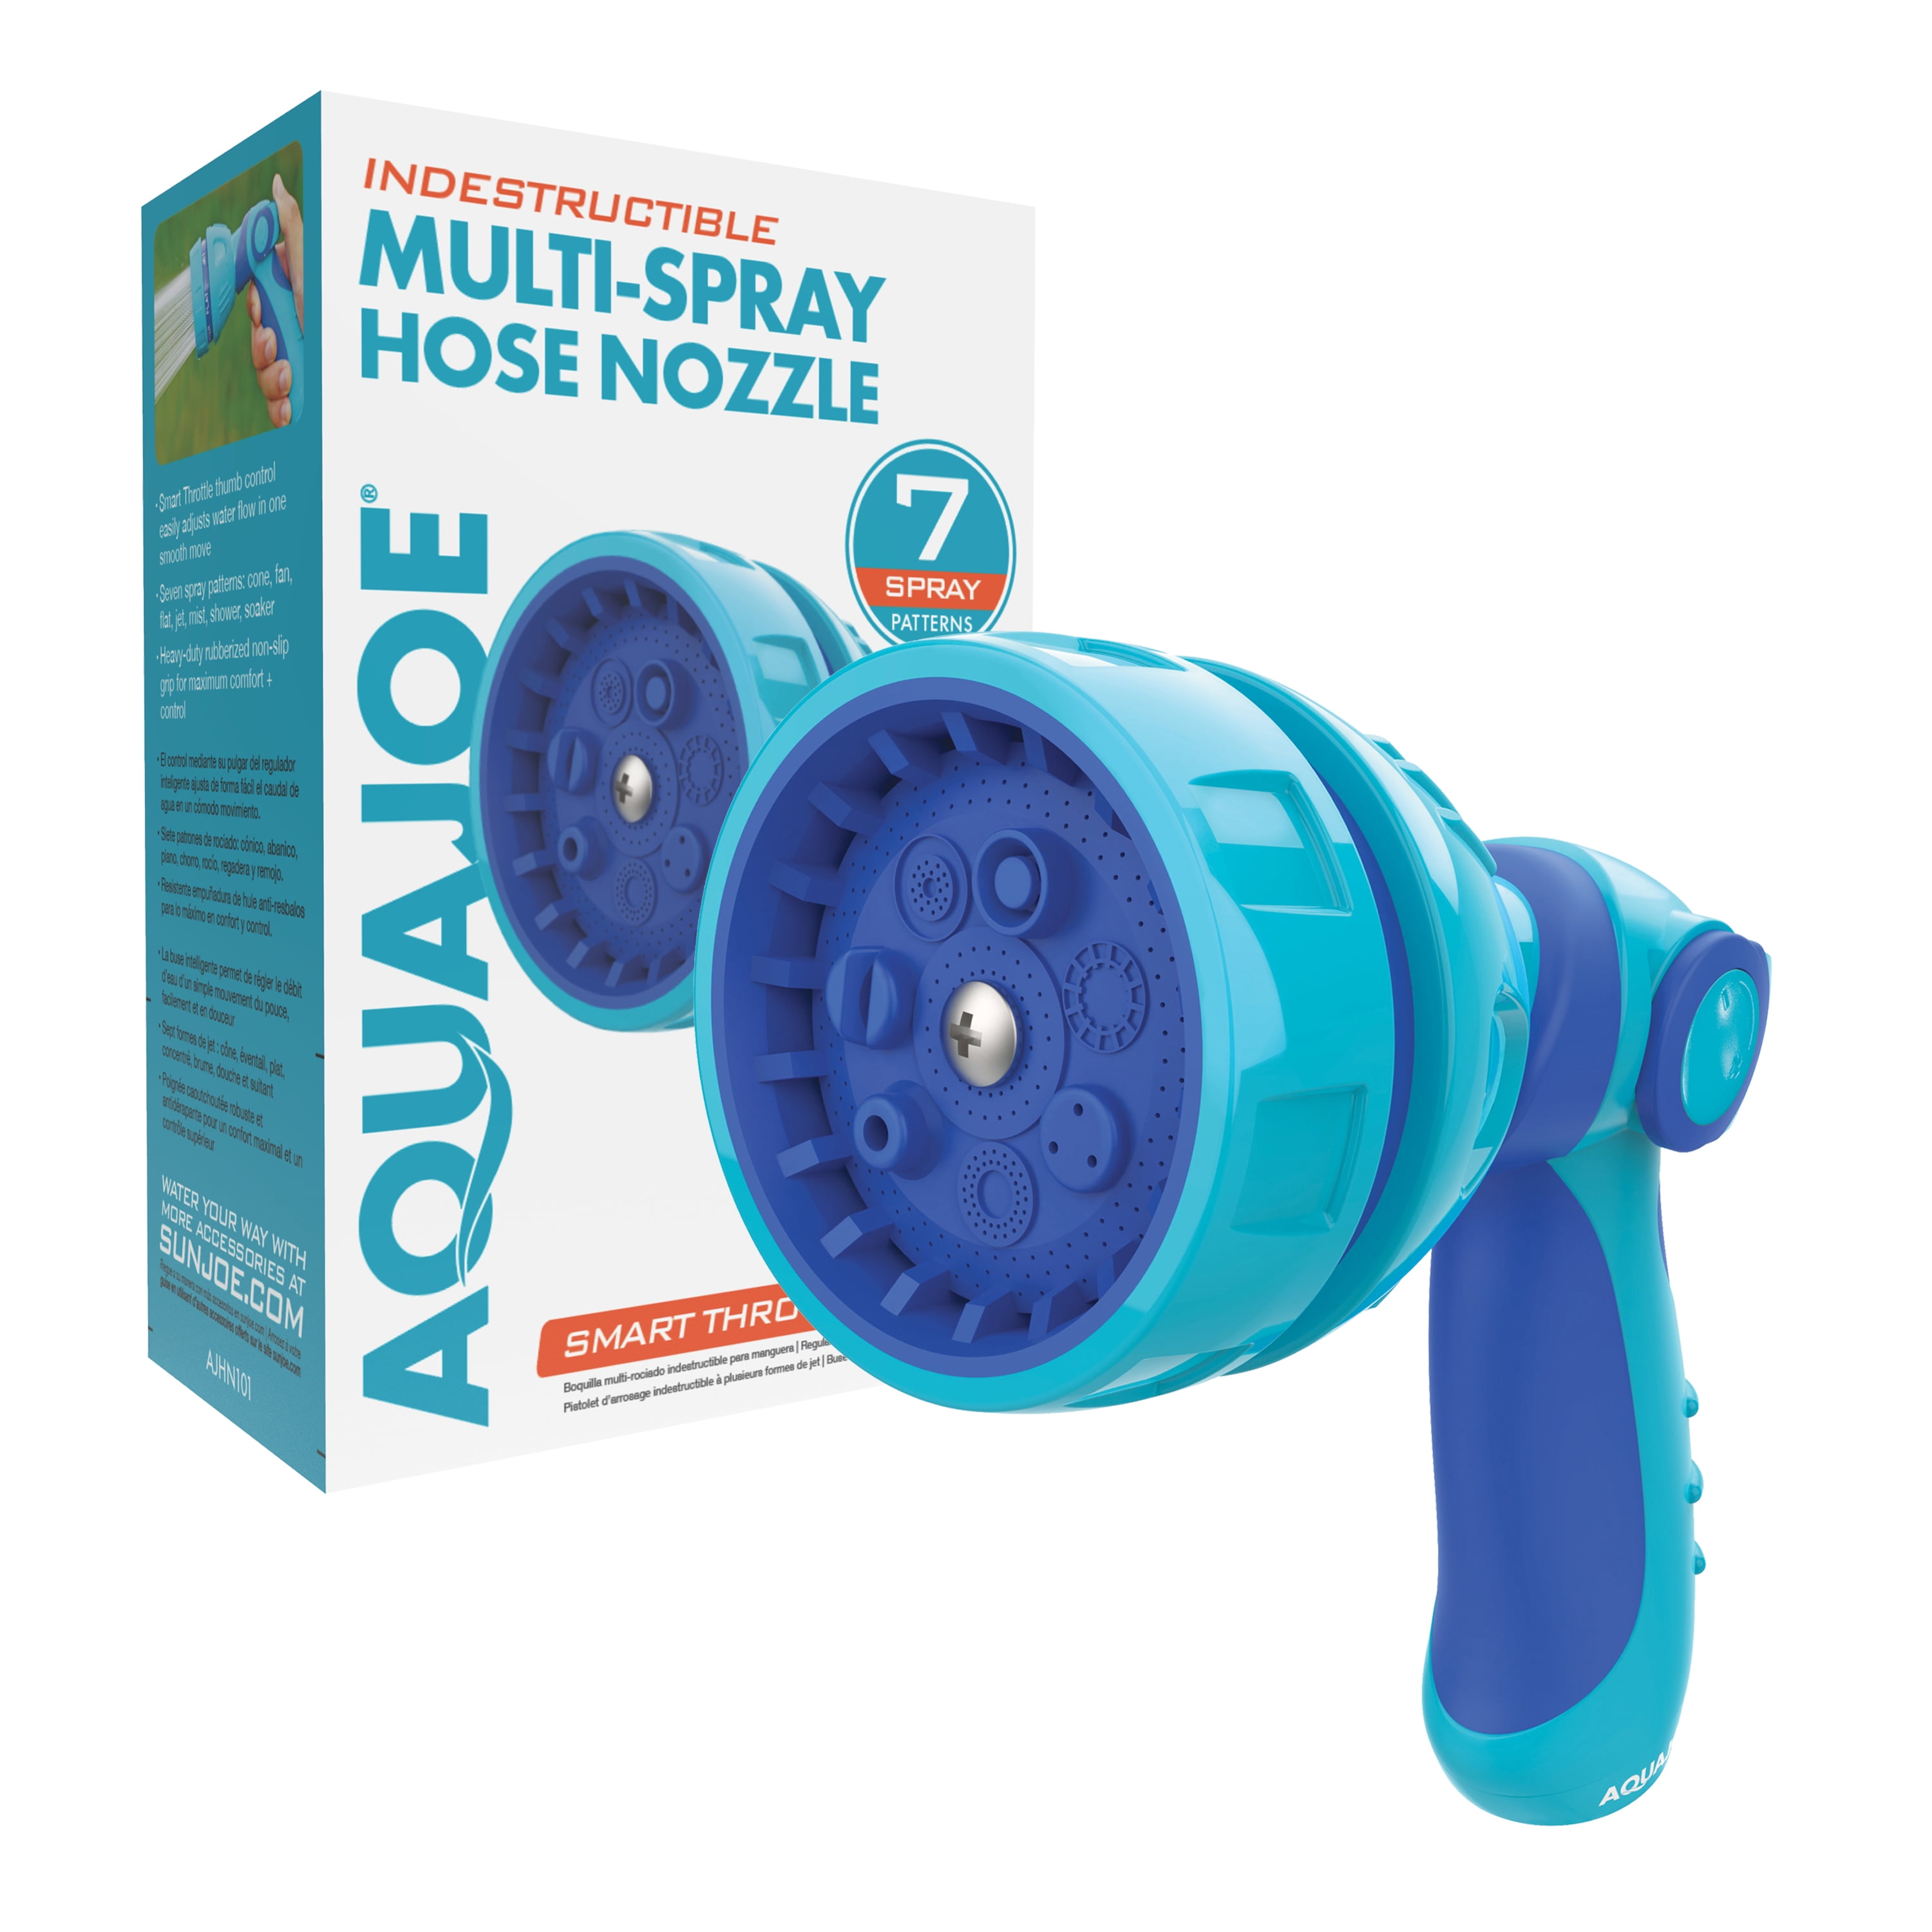 Garden Hose Teal Blue and Black Hard Plastic 7 Spray Nozzle Pattern Options 